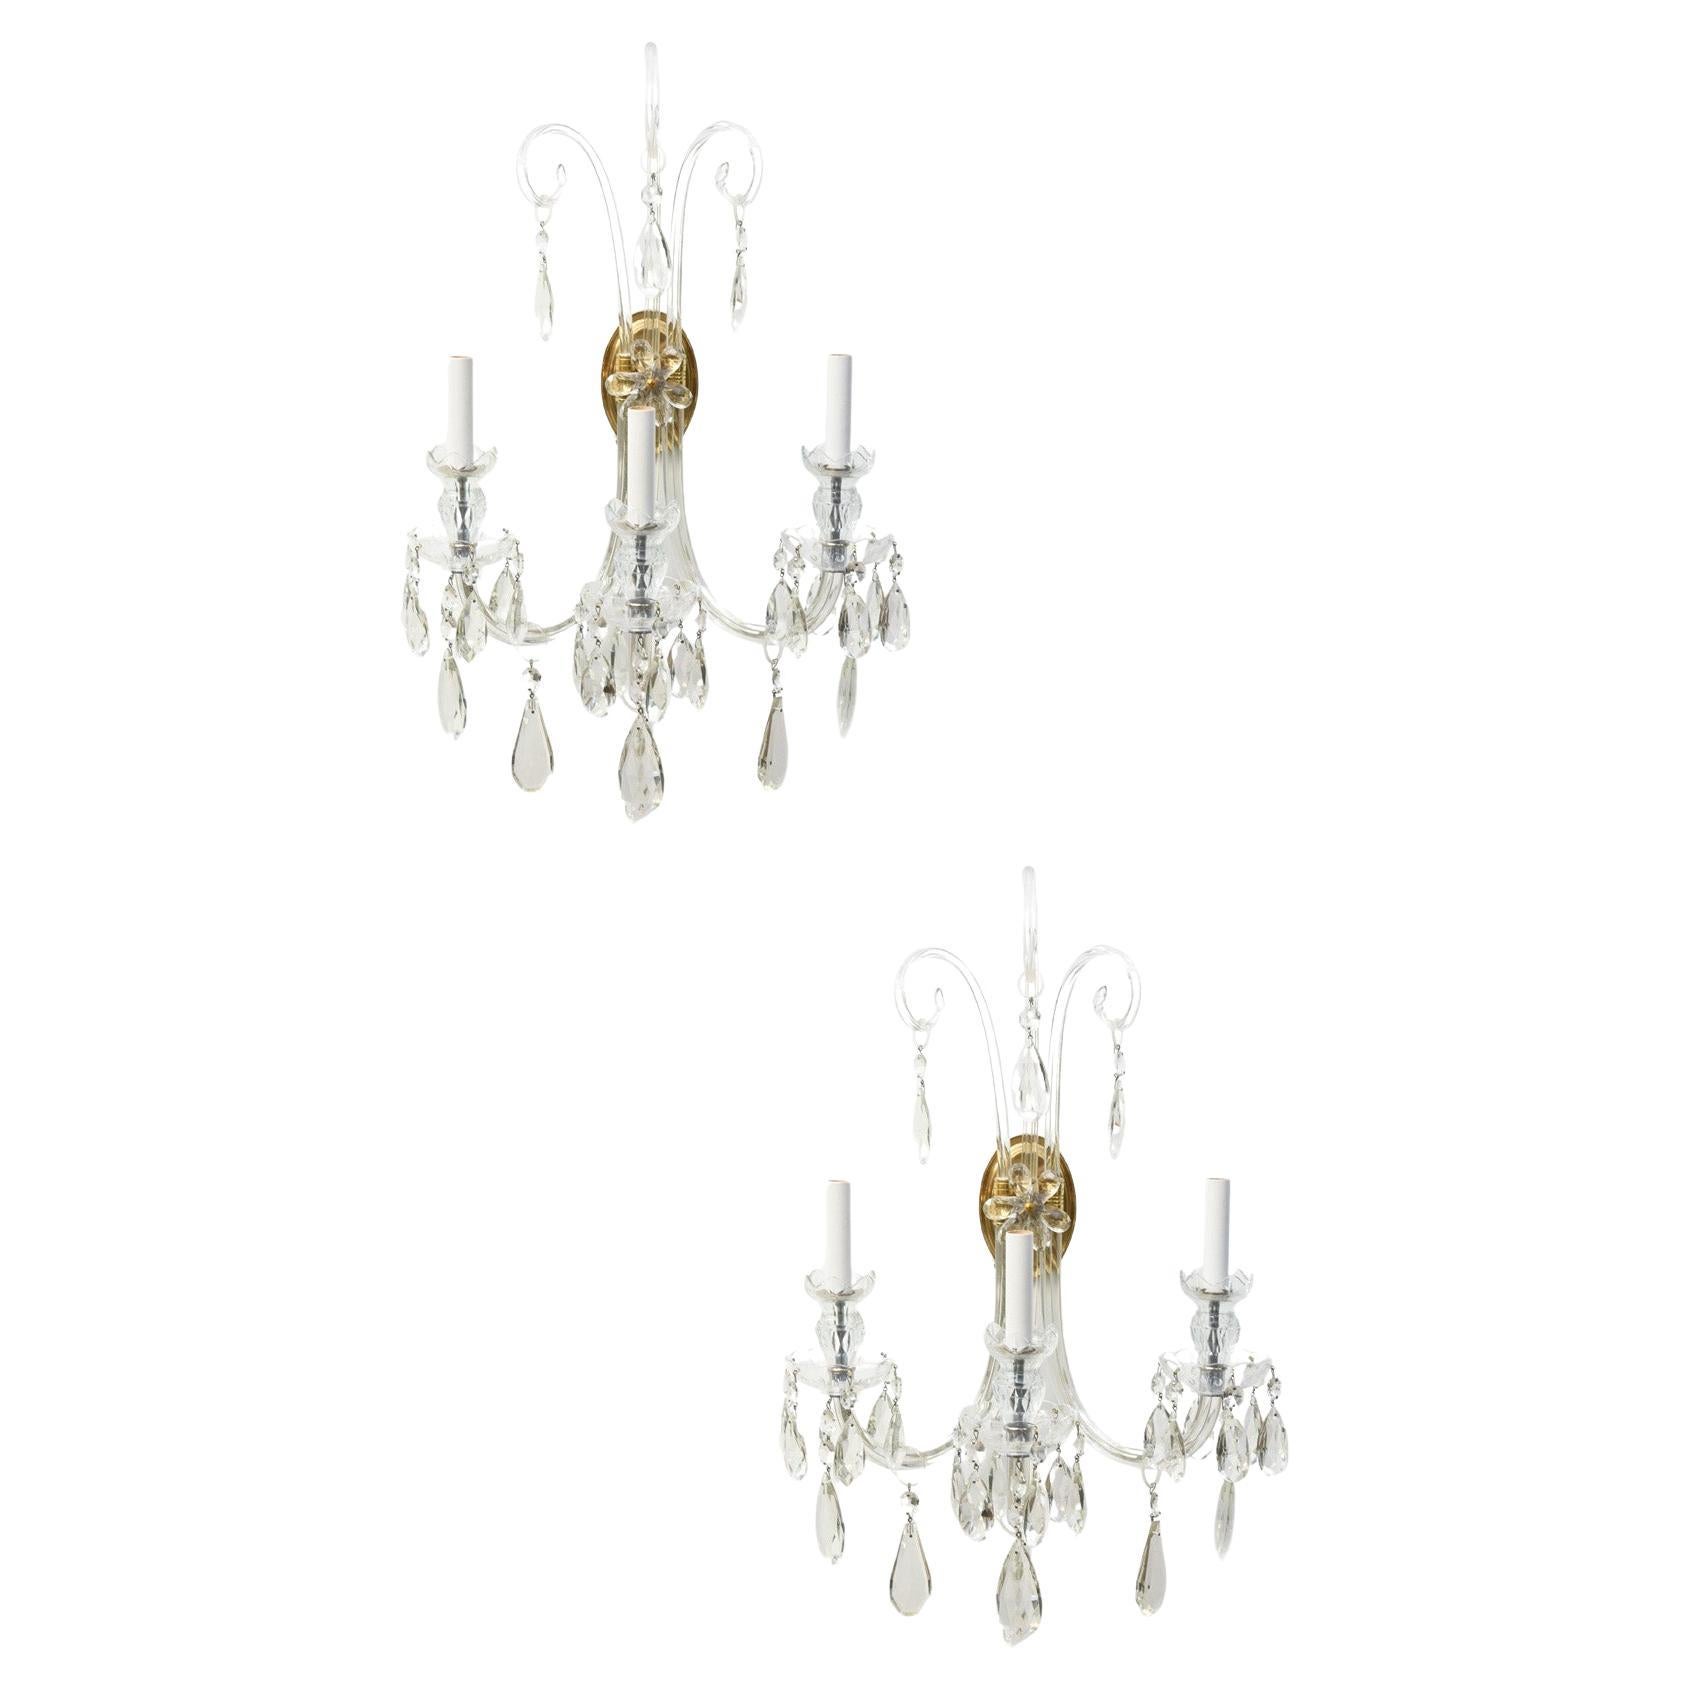 Mid-20th Century Lafount Style Crystal Sconces, a Pair For Sale